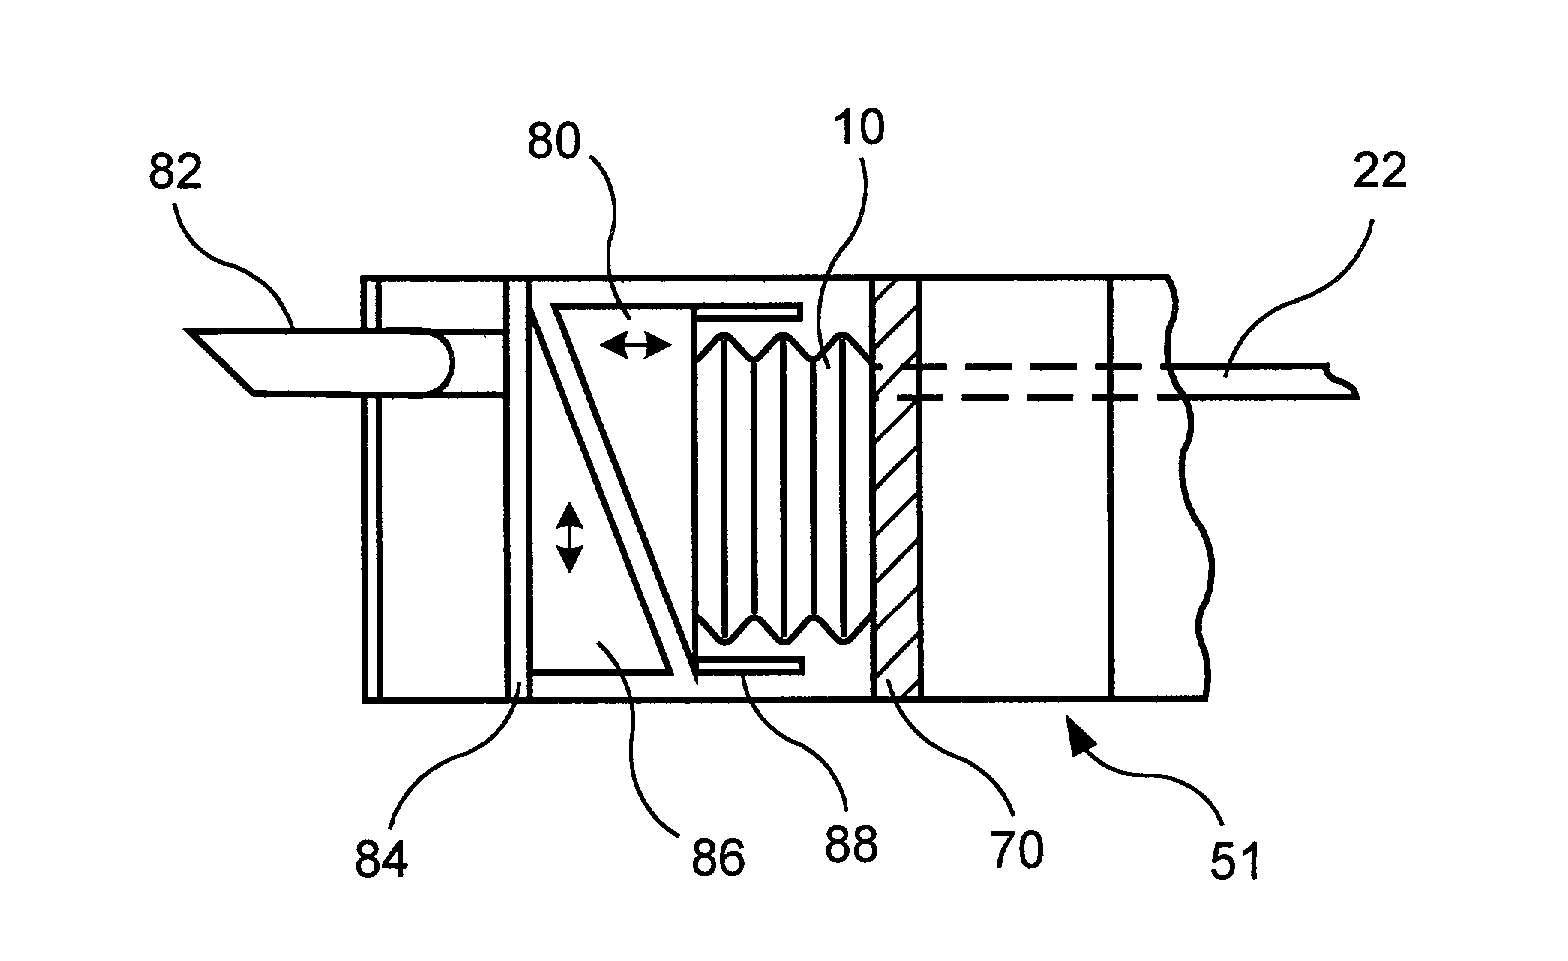 Balloon-type actuator for surgical applications